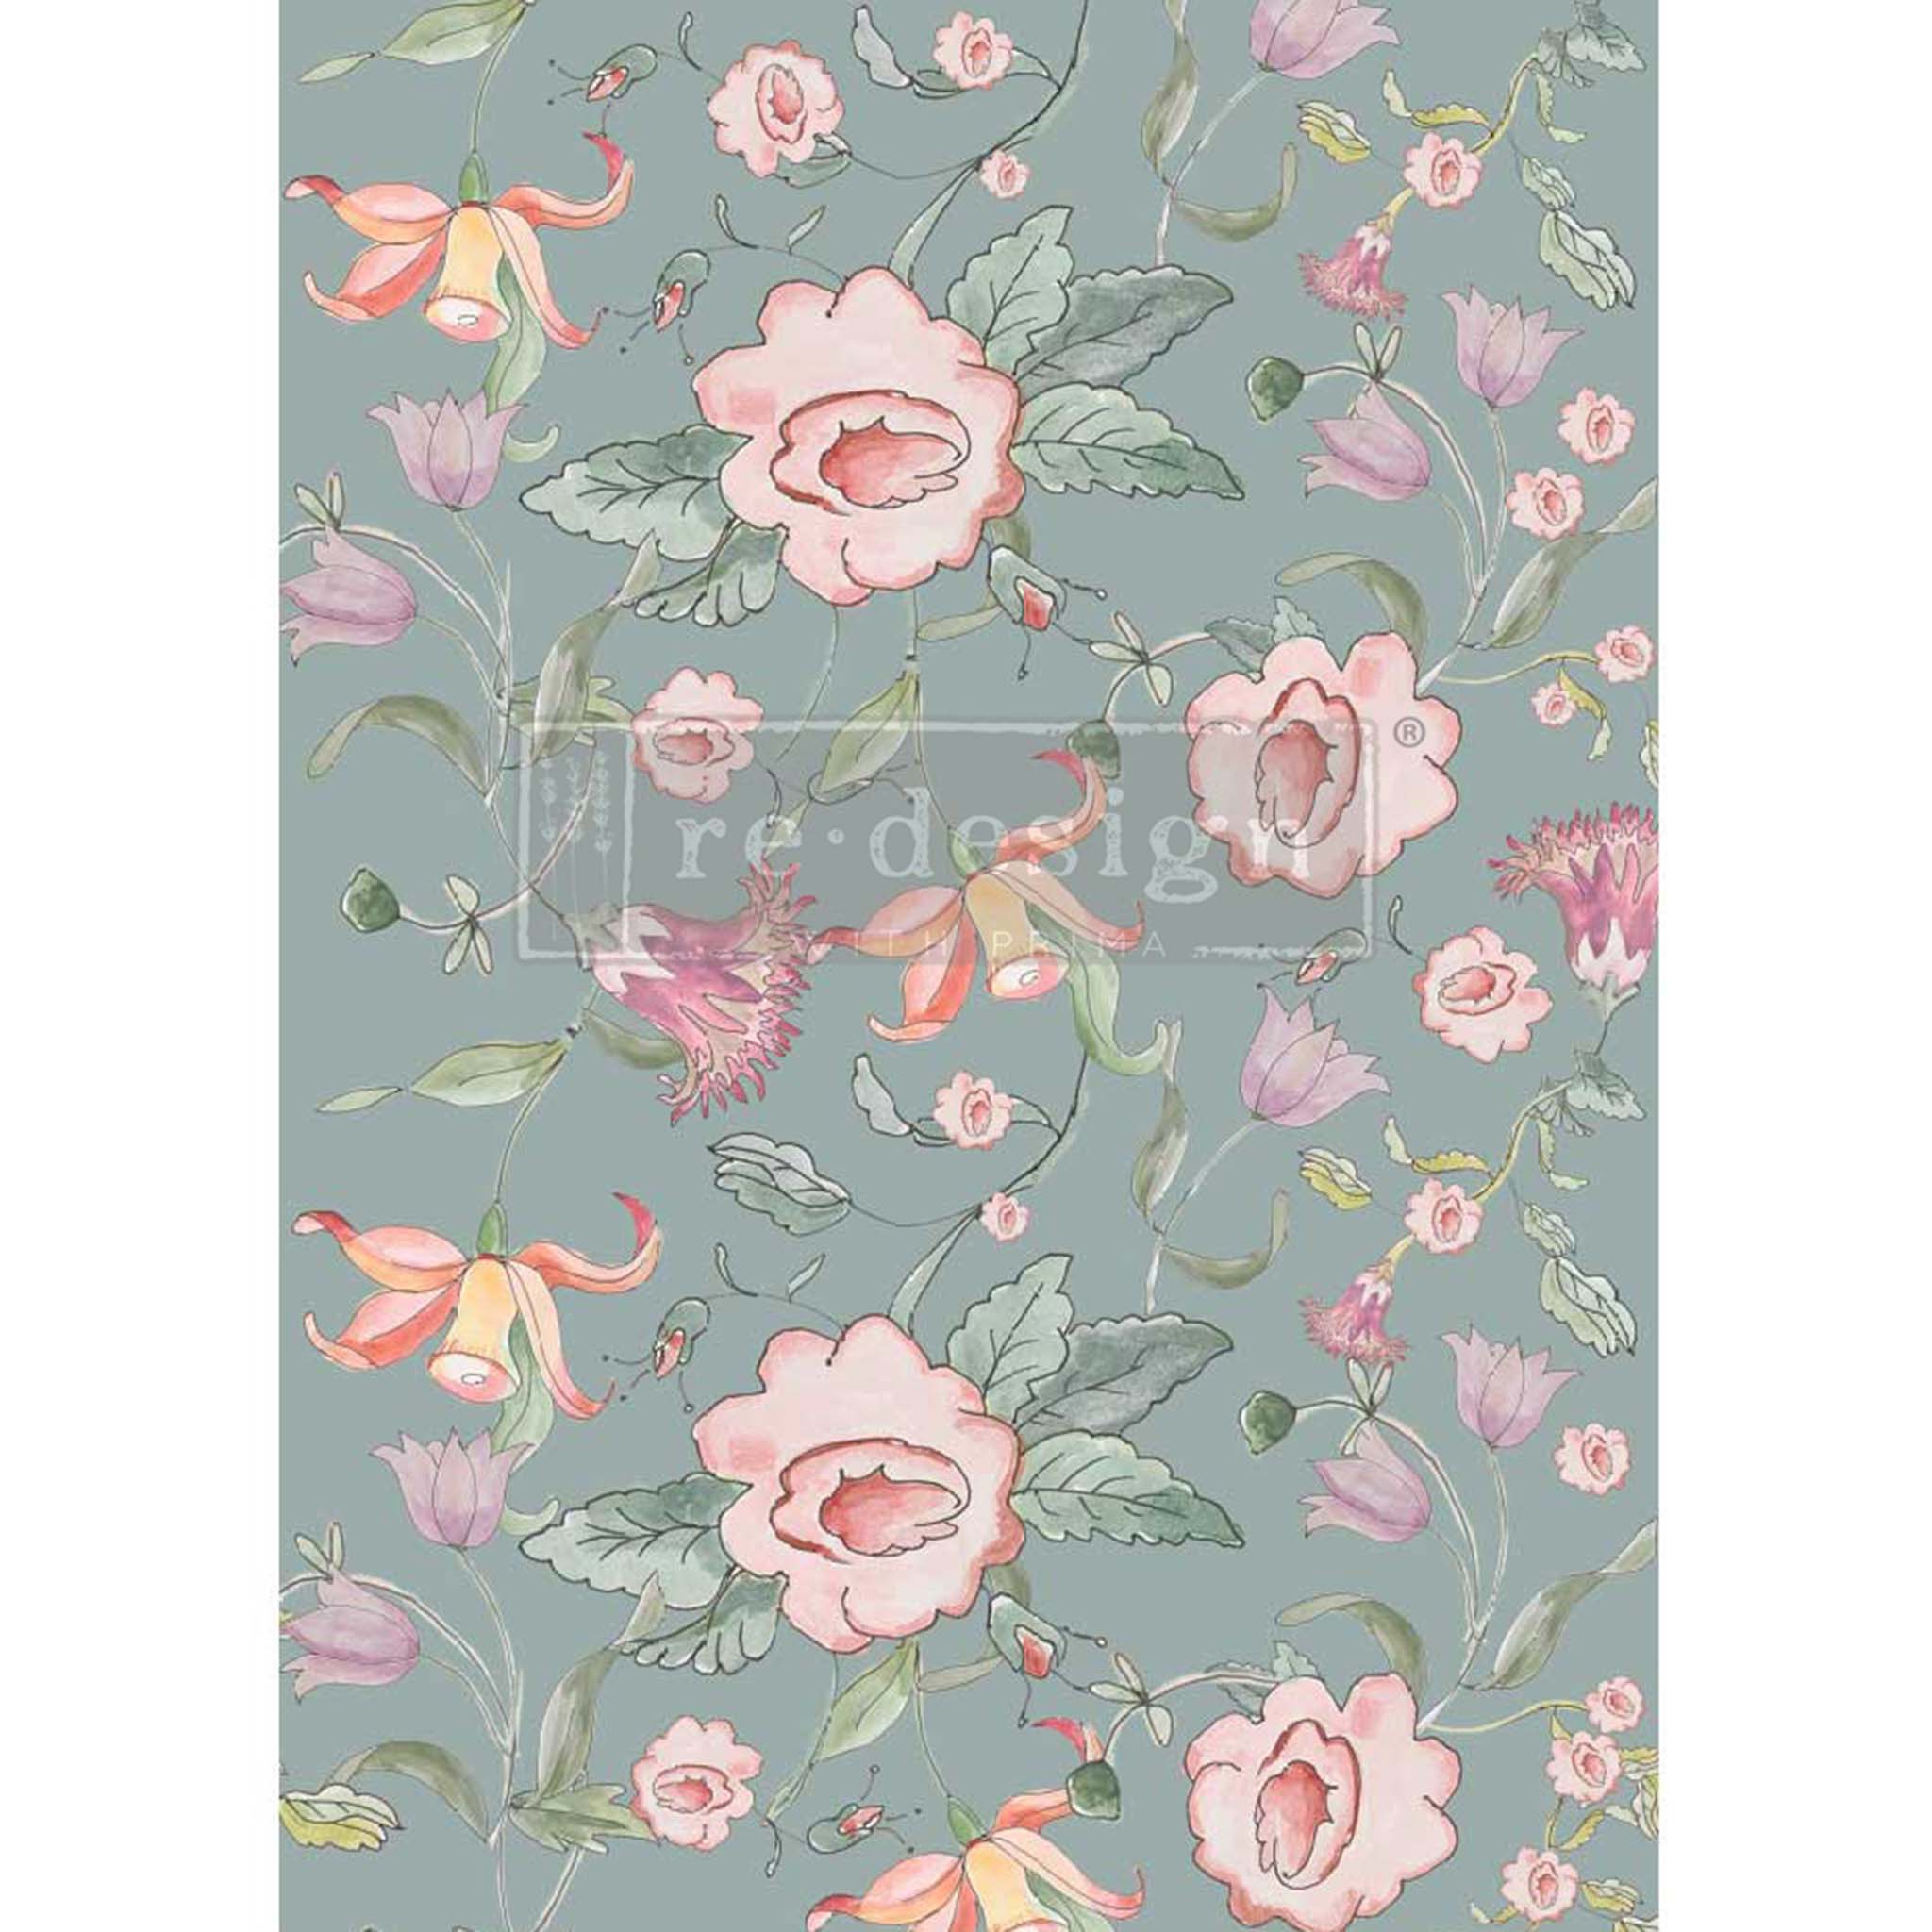 A1 fiber paper featuring a sage green background and charming floral illustrations in blush, mauve, and peach. White borders are on the sides.